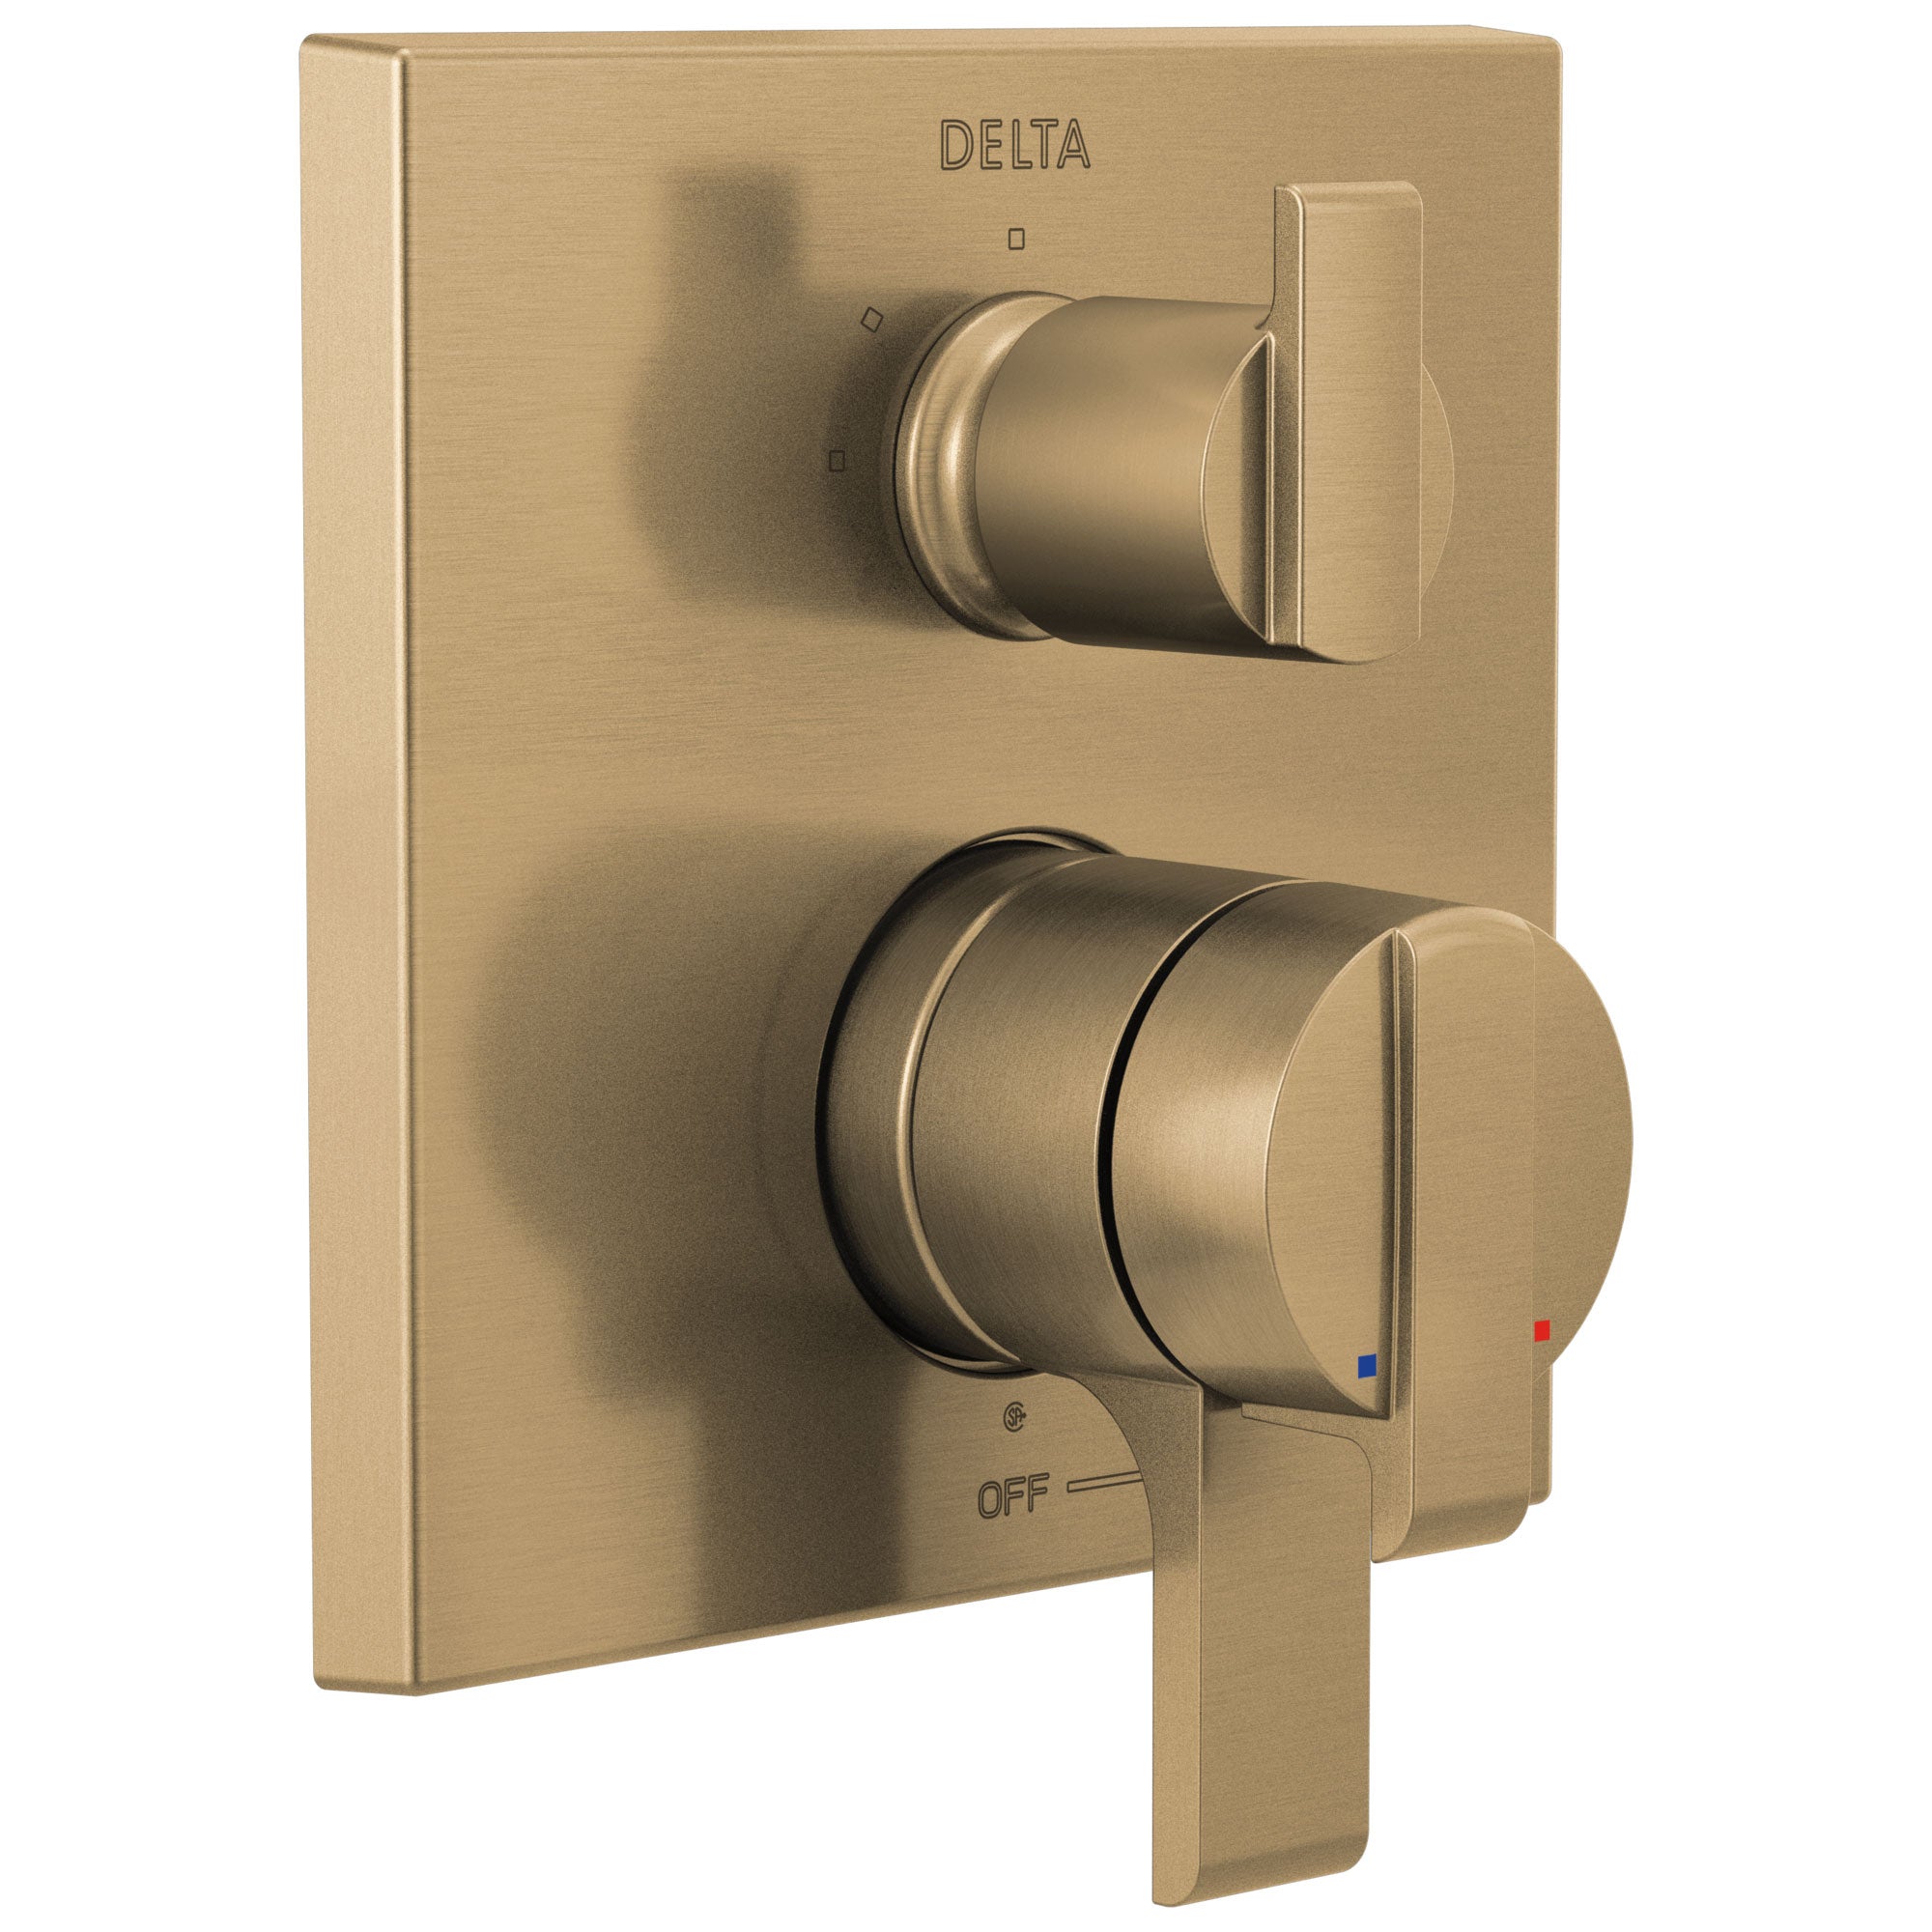 Delta Ara Champagne Bronze Finish Angular Modern 17 Series Shower Faucet Control with 3-Setting Integrated Diverter Includes Valve and Handles D3734V